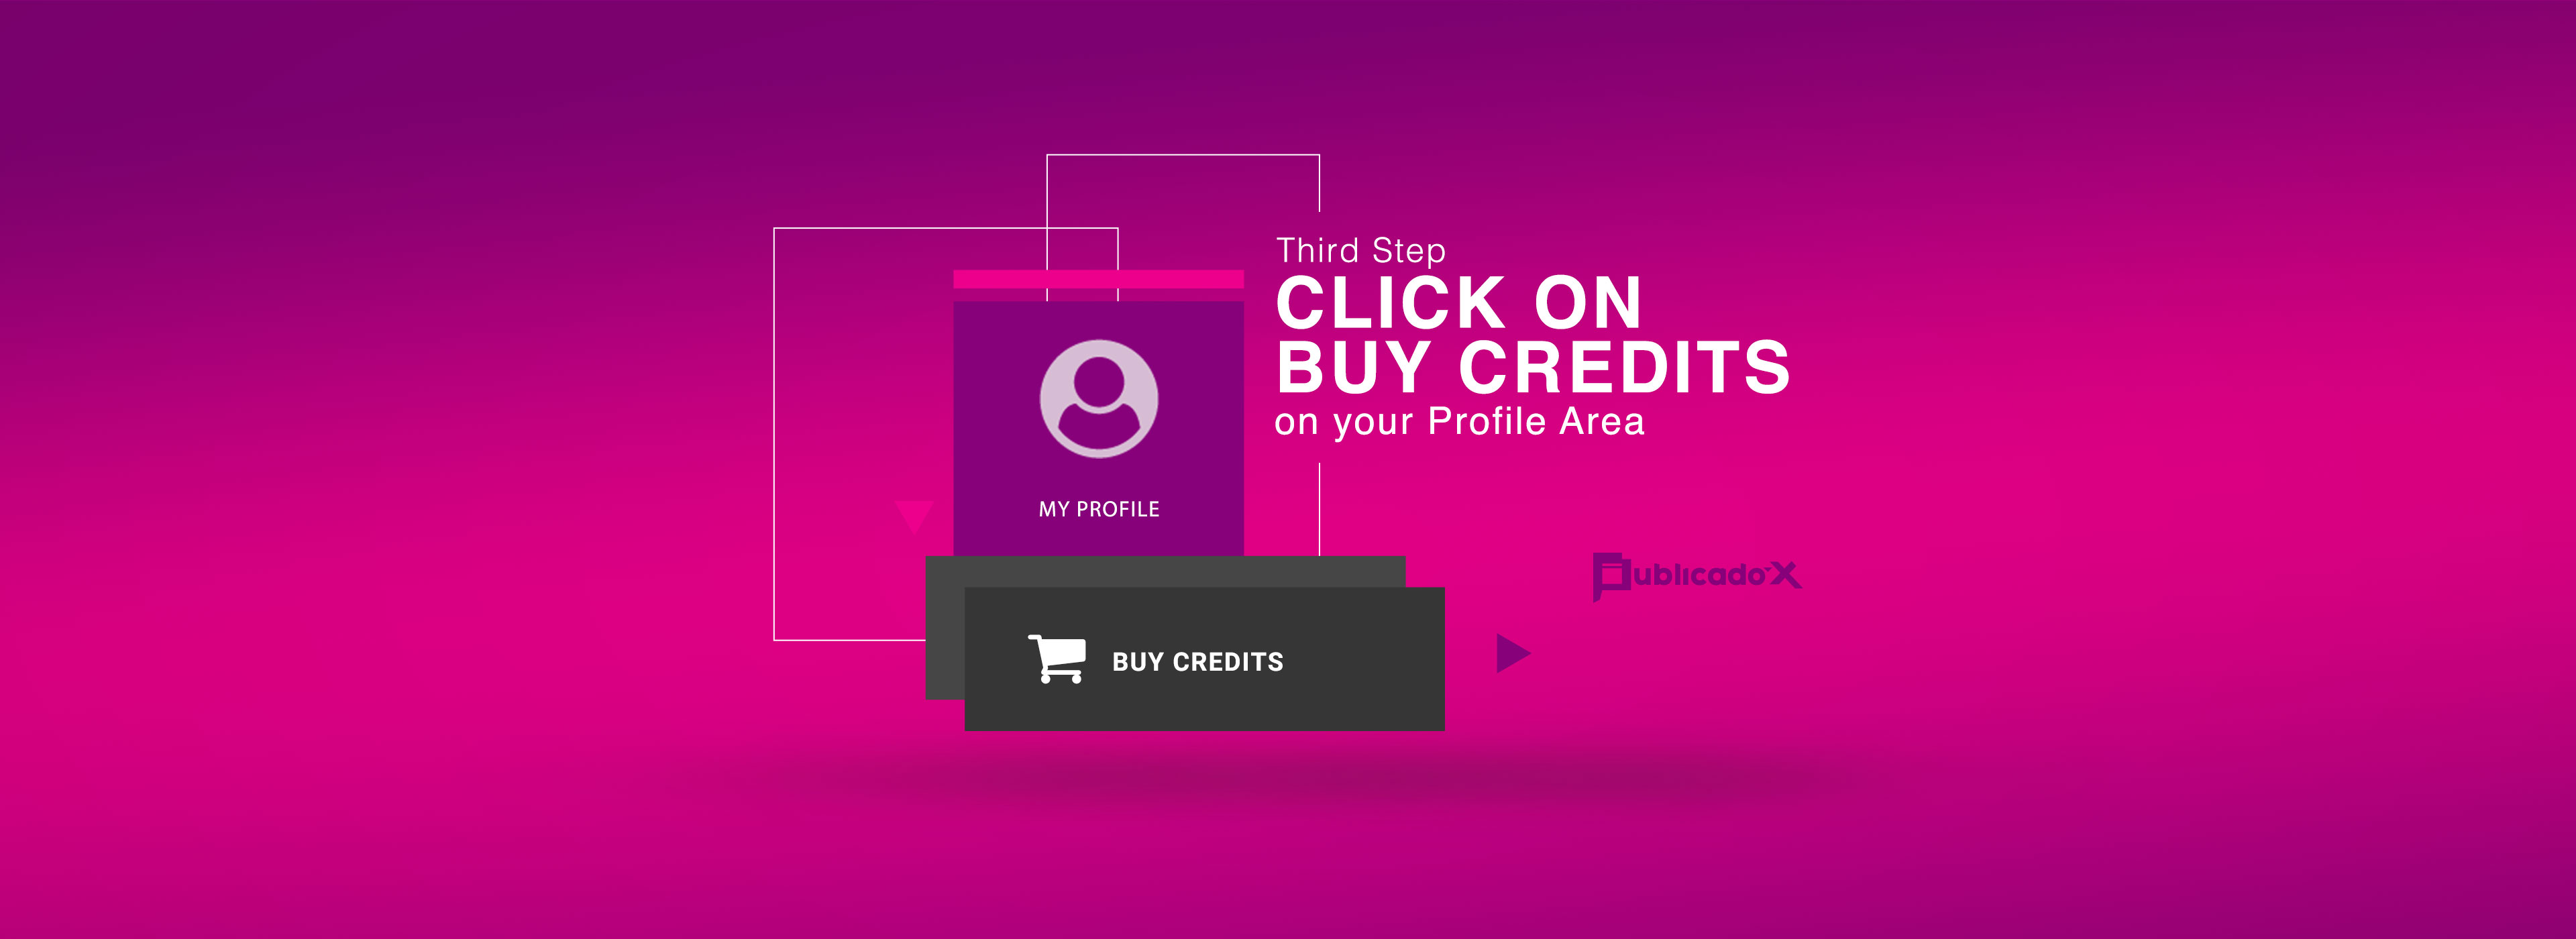 Step 3  Go to your profile area in My Profile and click on Credits followed by Buy Credits.